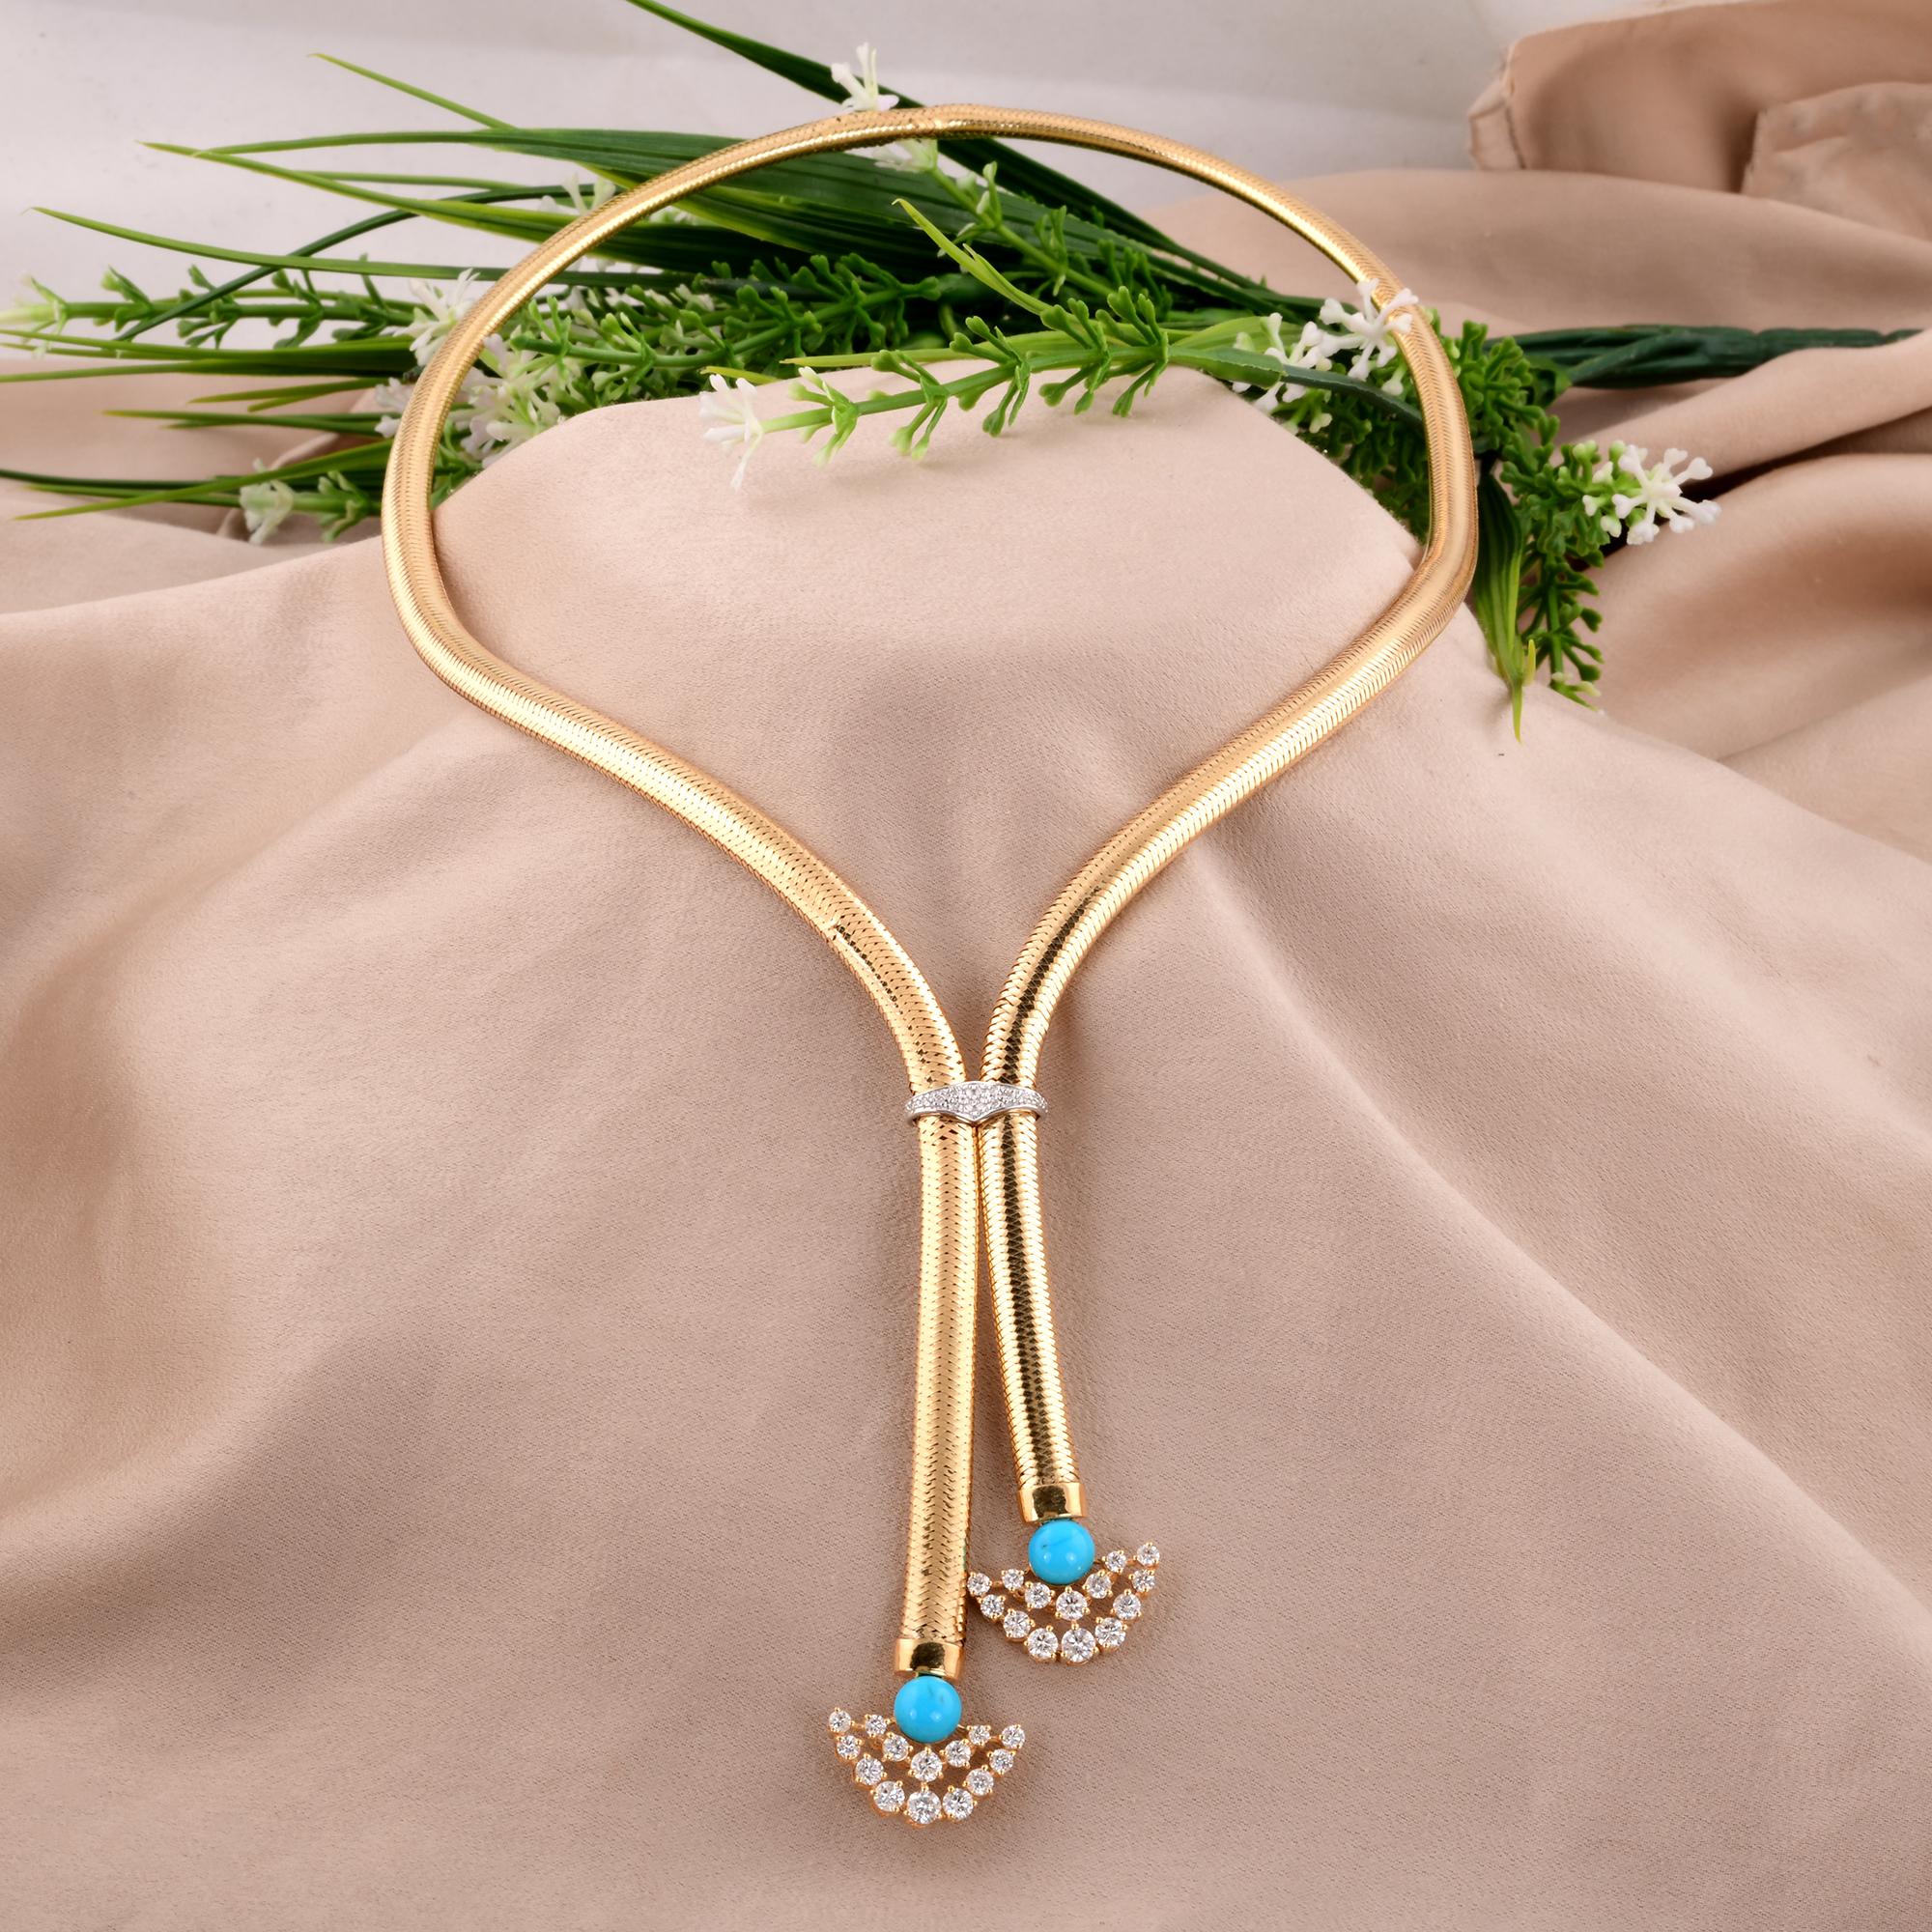 Blue Turquoise H/SI Diamond Pendant 18 Karat Yellow Gold Snake Chain Necklace For Sale 1